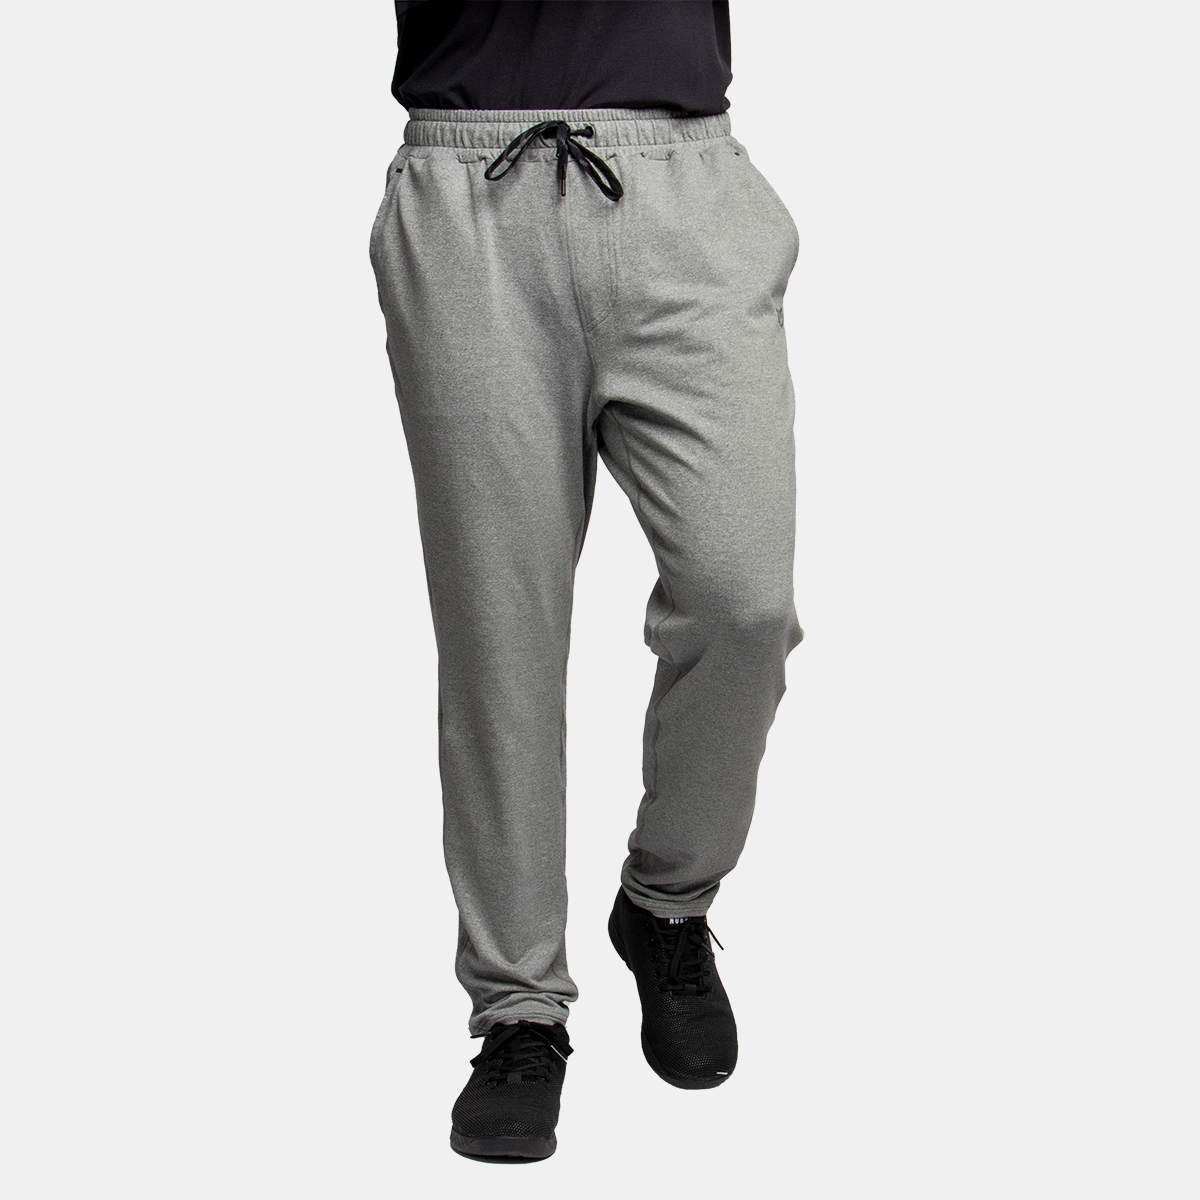 Under Armour Left chino pants in white buy online - Golf House